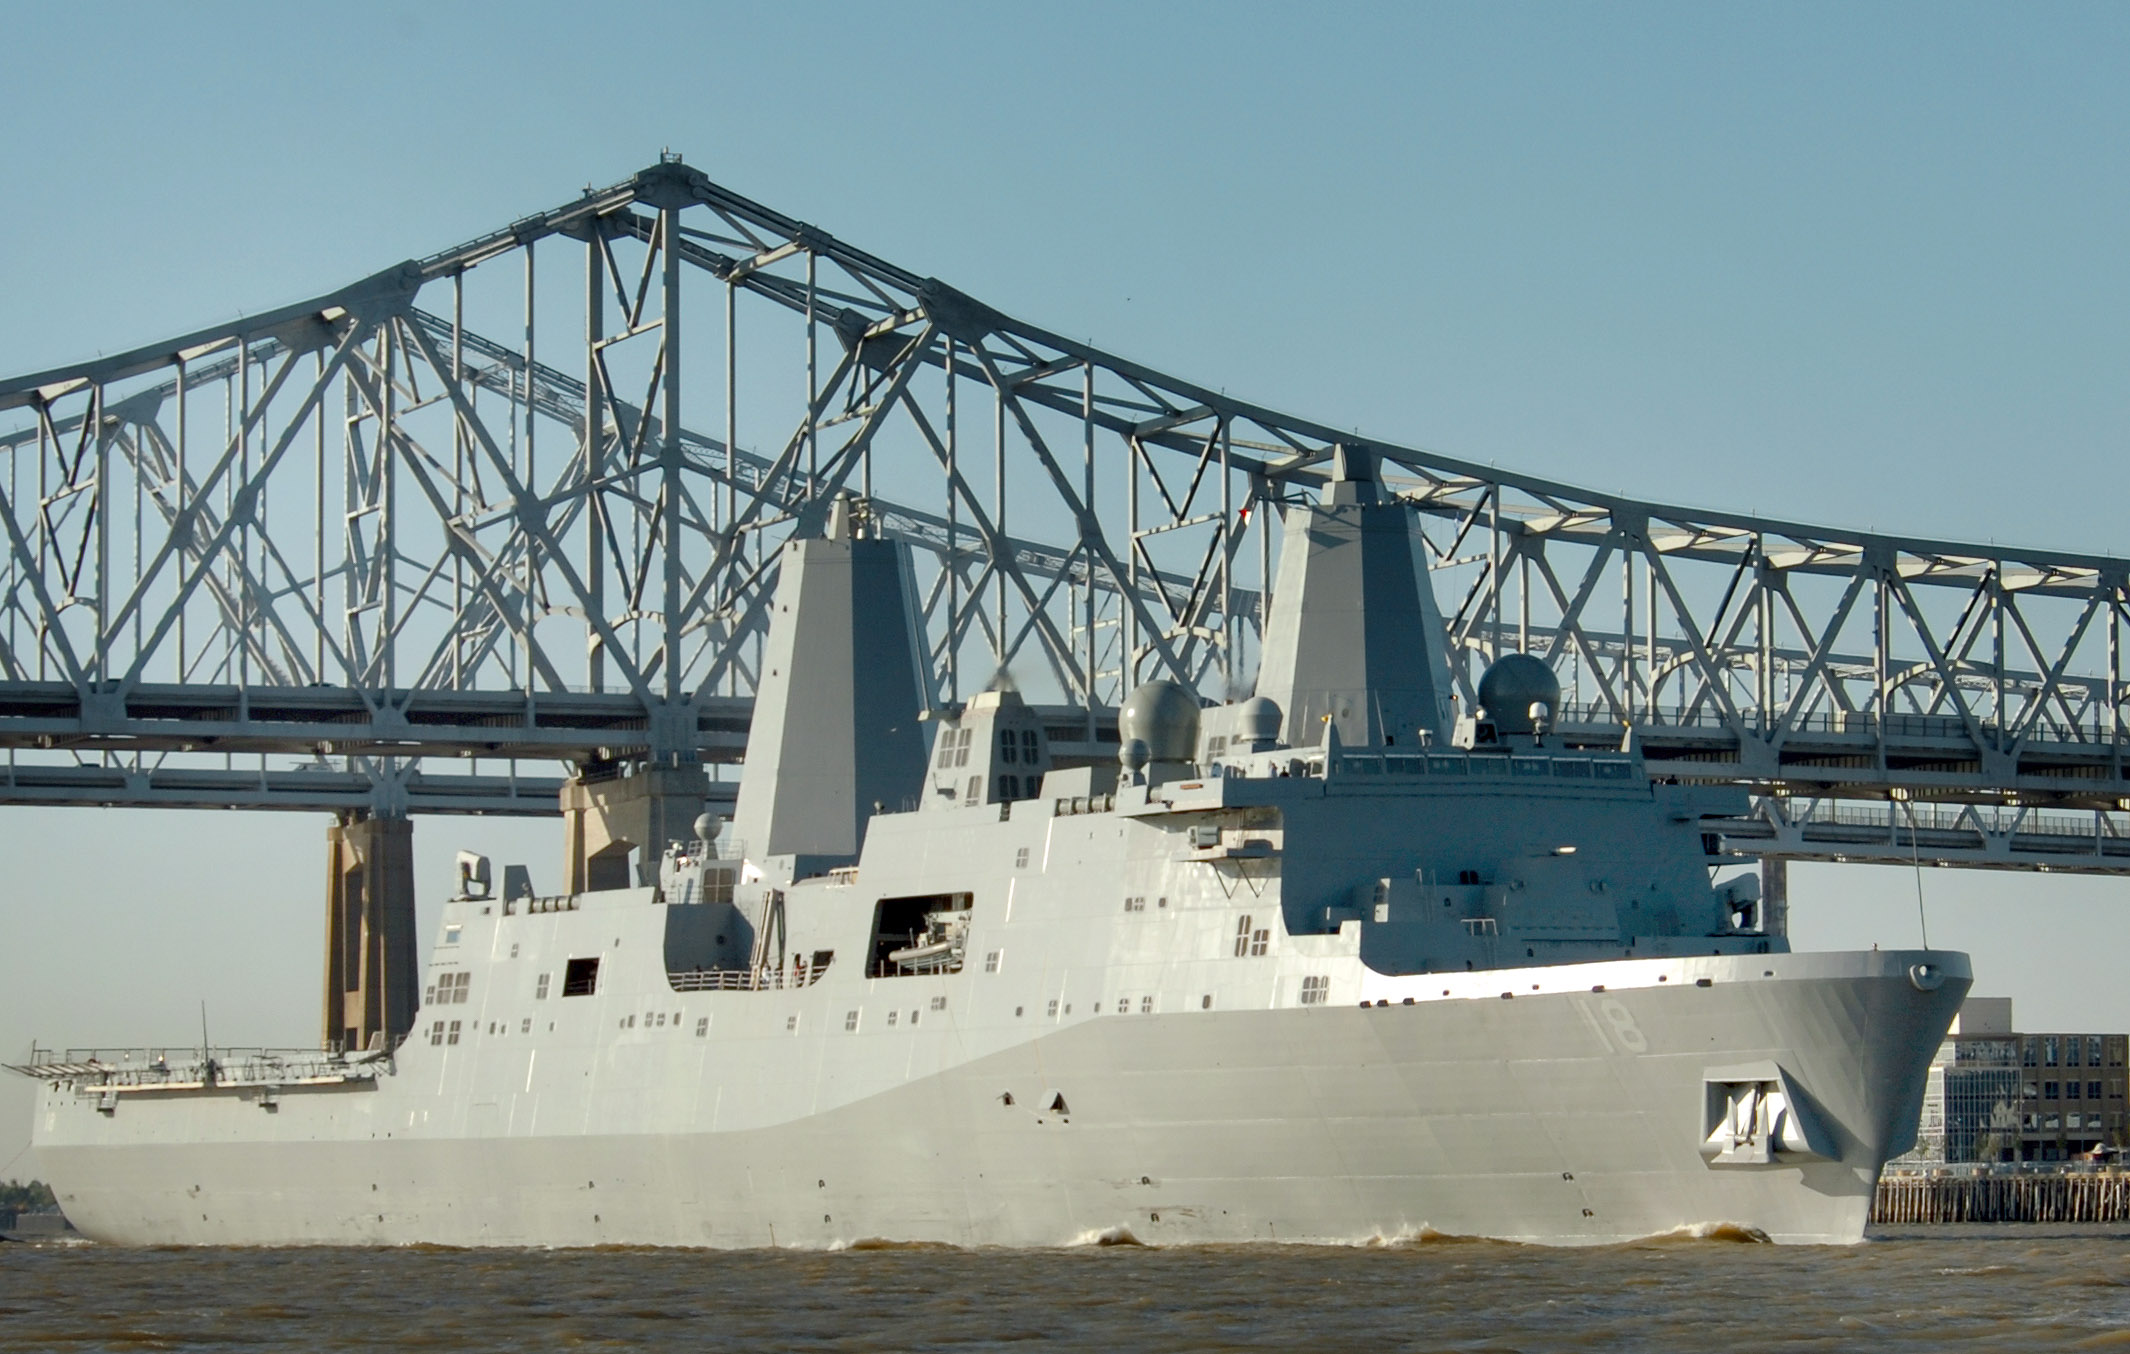 US Navy 061023-N-9995B-001 The Pre-Commissioning Unit New Orleans (LPD 18) transits past the city of New Orleans on the Mississippi River